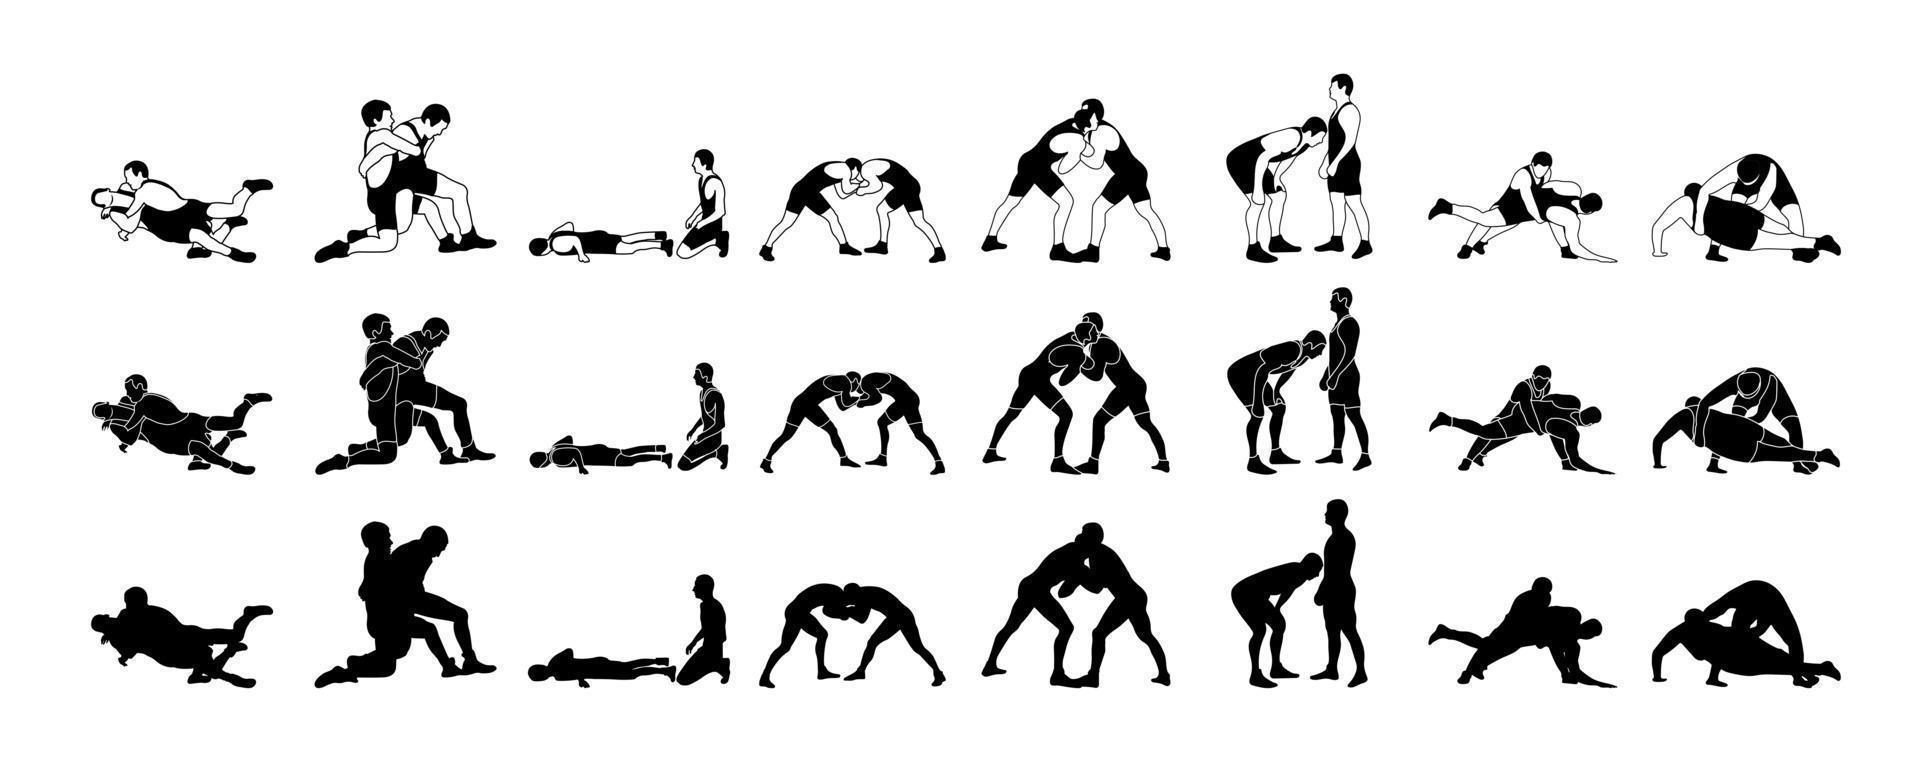 Athlete wrestler in wrestling, duel, fight. A pack of silhouettes Greco Roman, freestyle, classical wrestling. vector